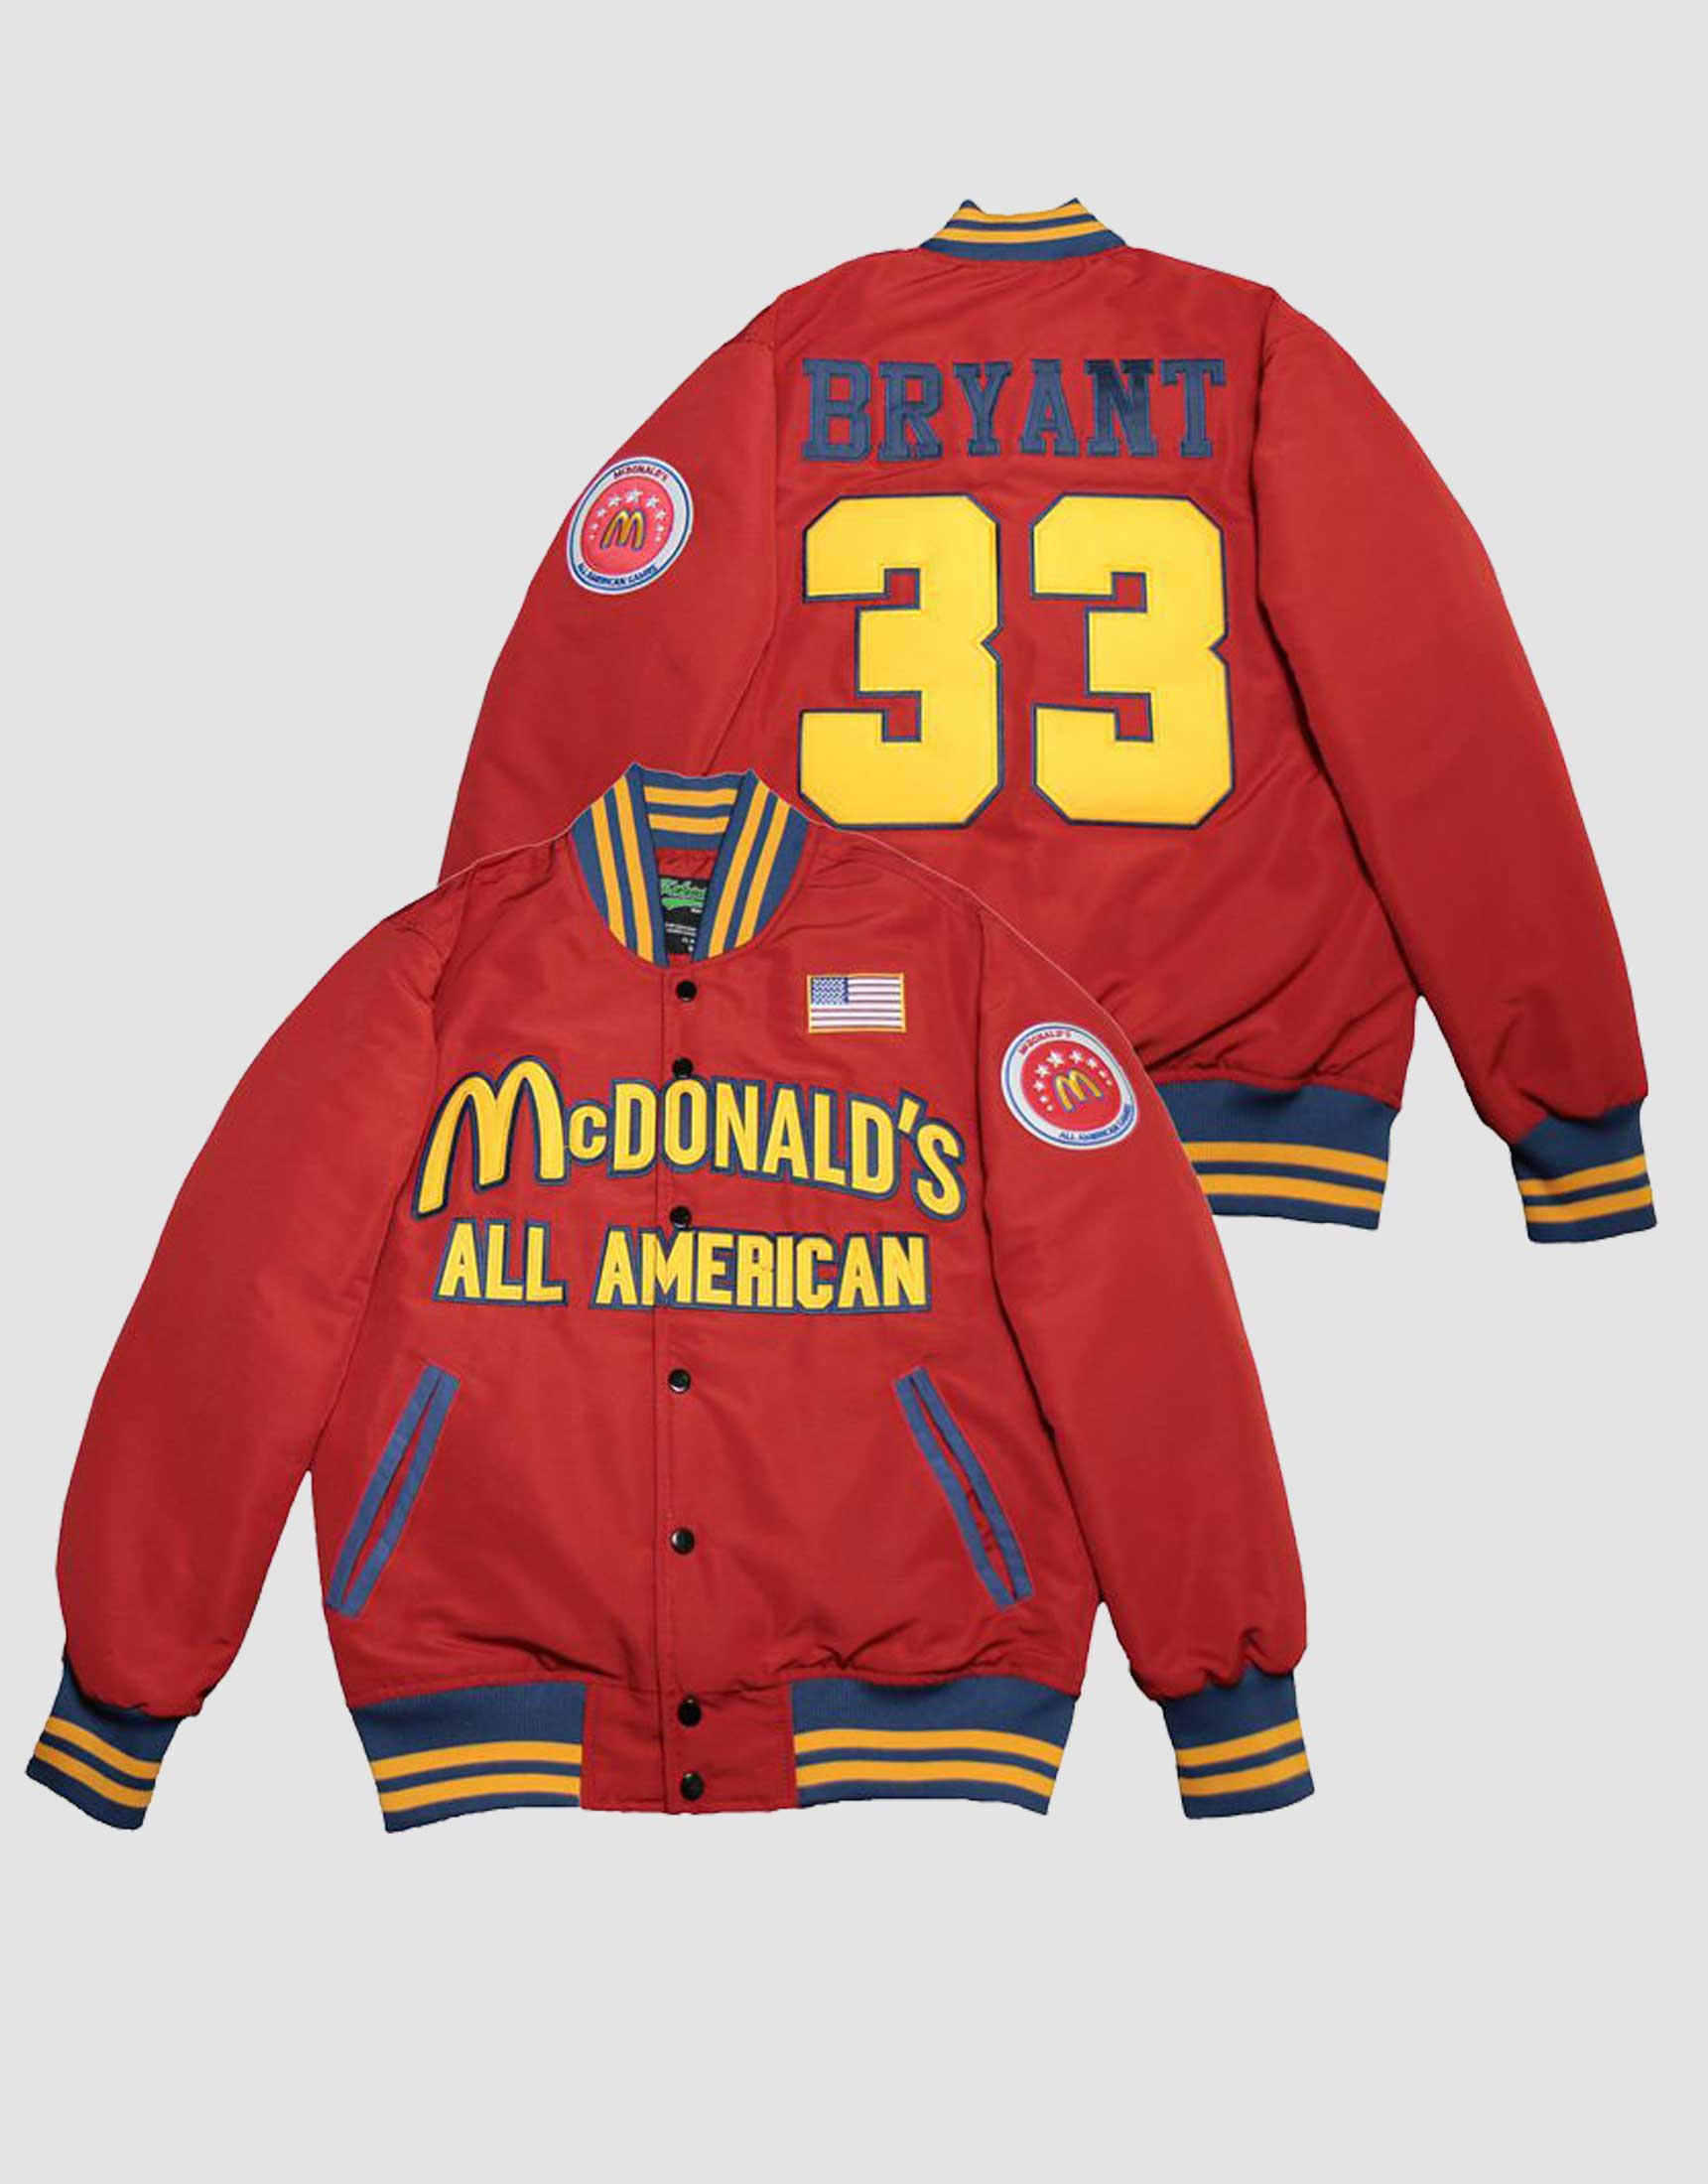 Blue and White Bryant McDonalds All American Blue Stitched Basketball  Jersey #33